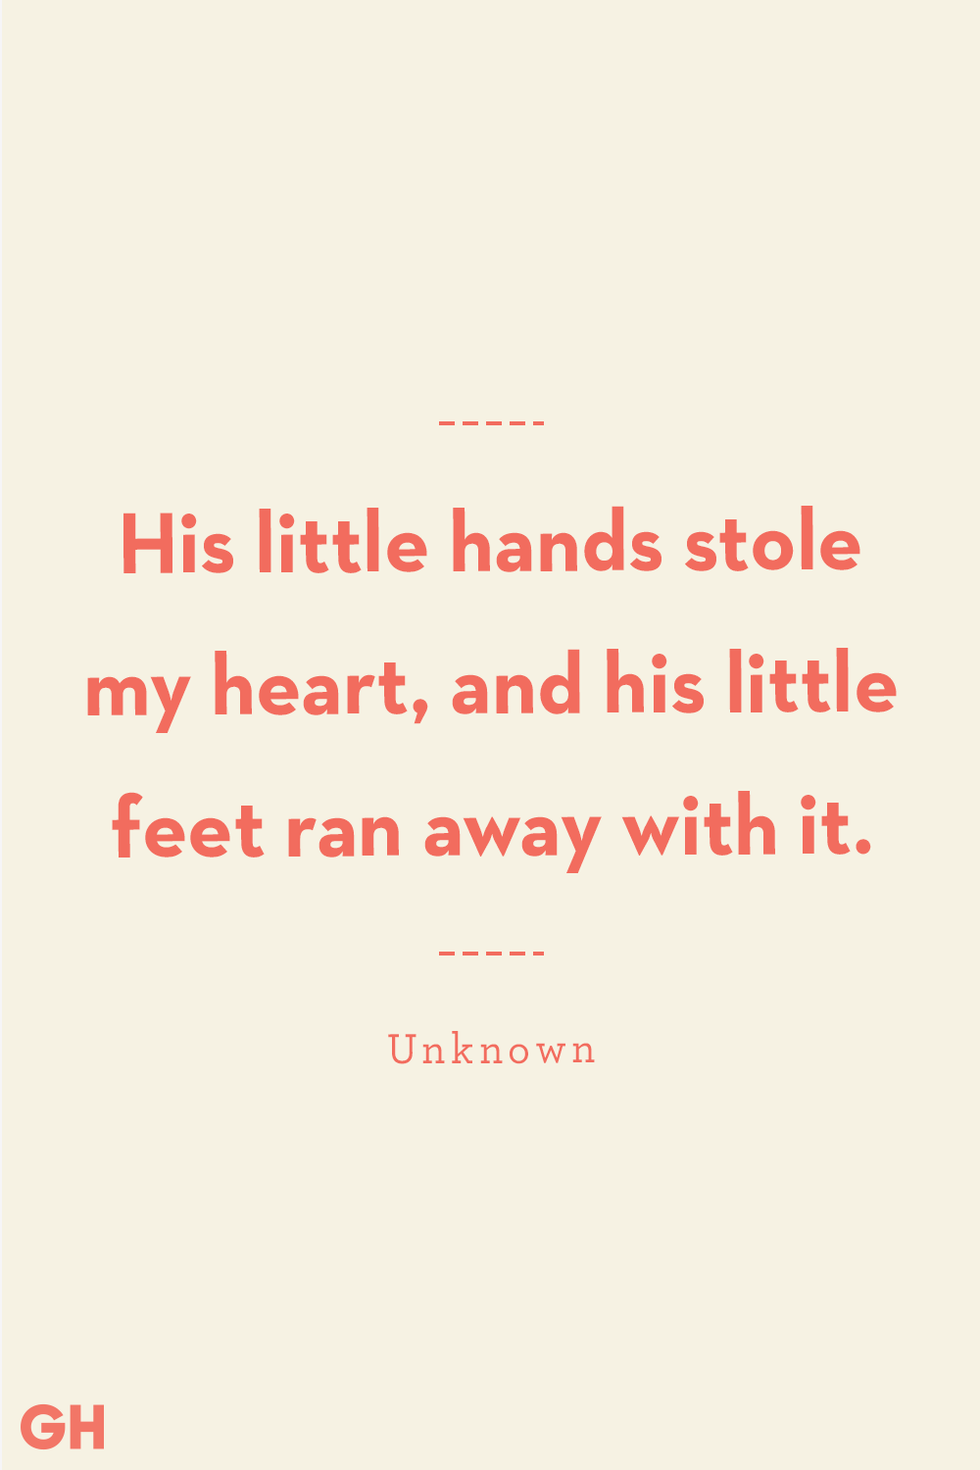 his little hands stole my heart, and his little feet ran away with it